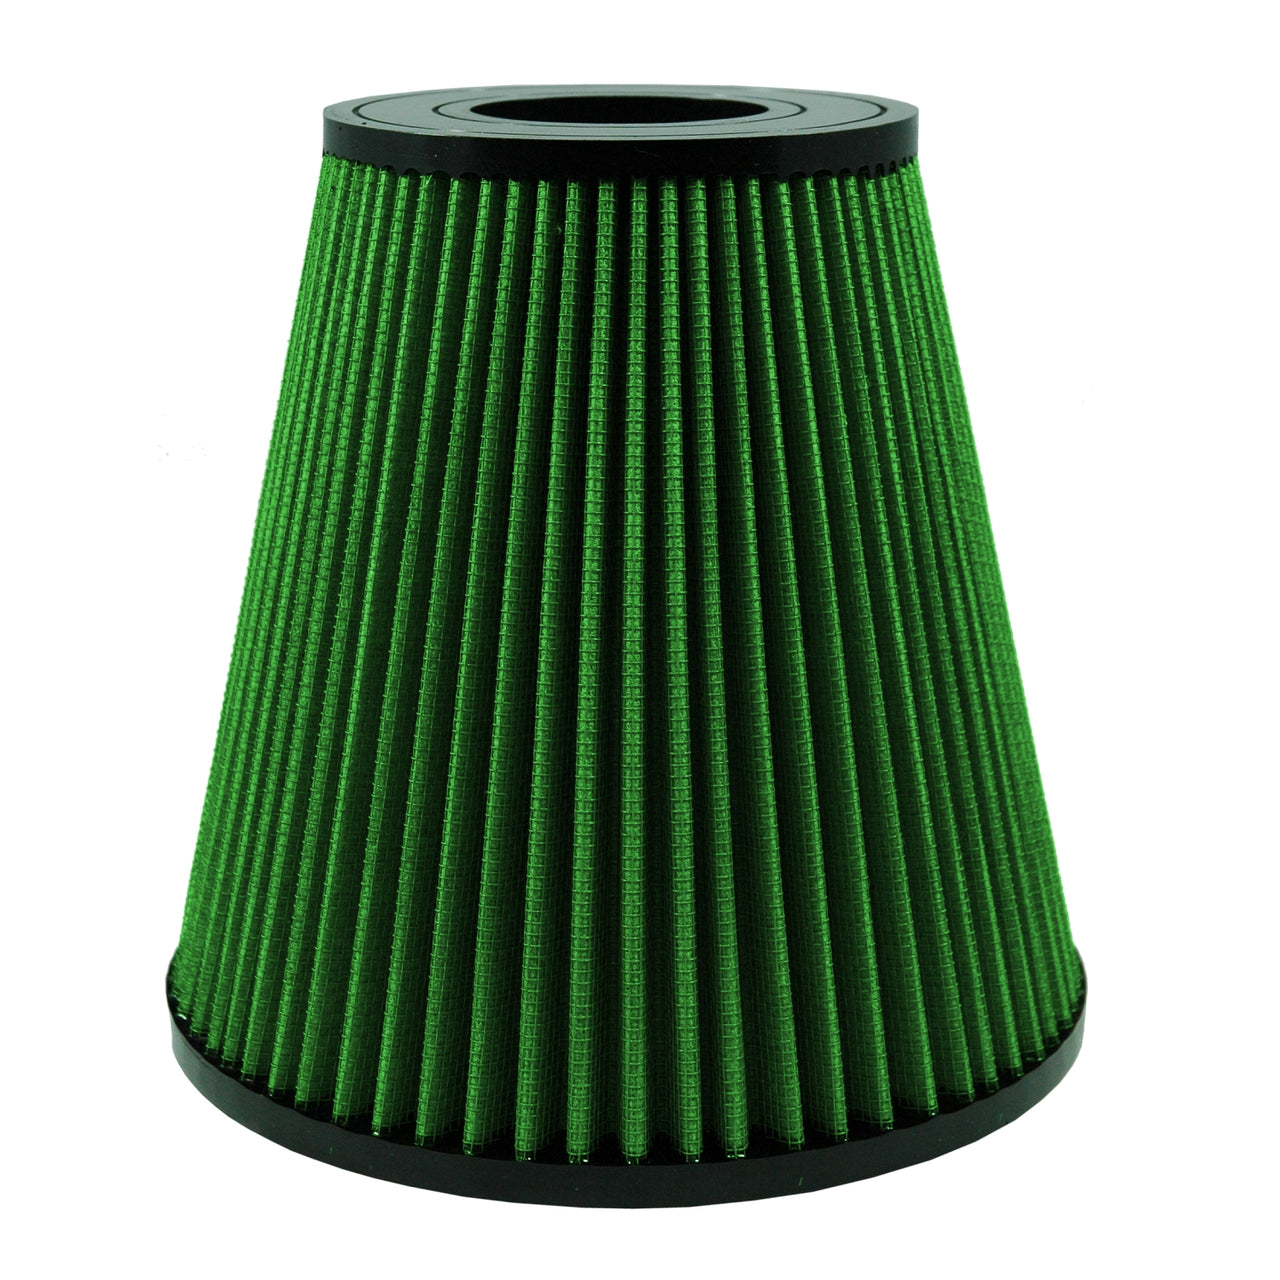 Green Filter Dual Cone Filter - ID 4in. / Base 7.75in. / Top 4.75in. / H 7.625in.